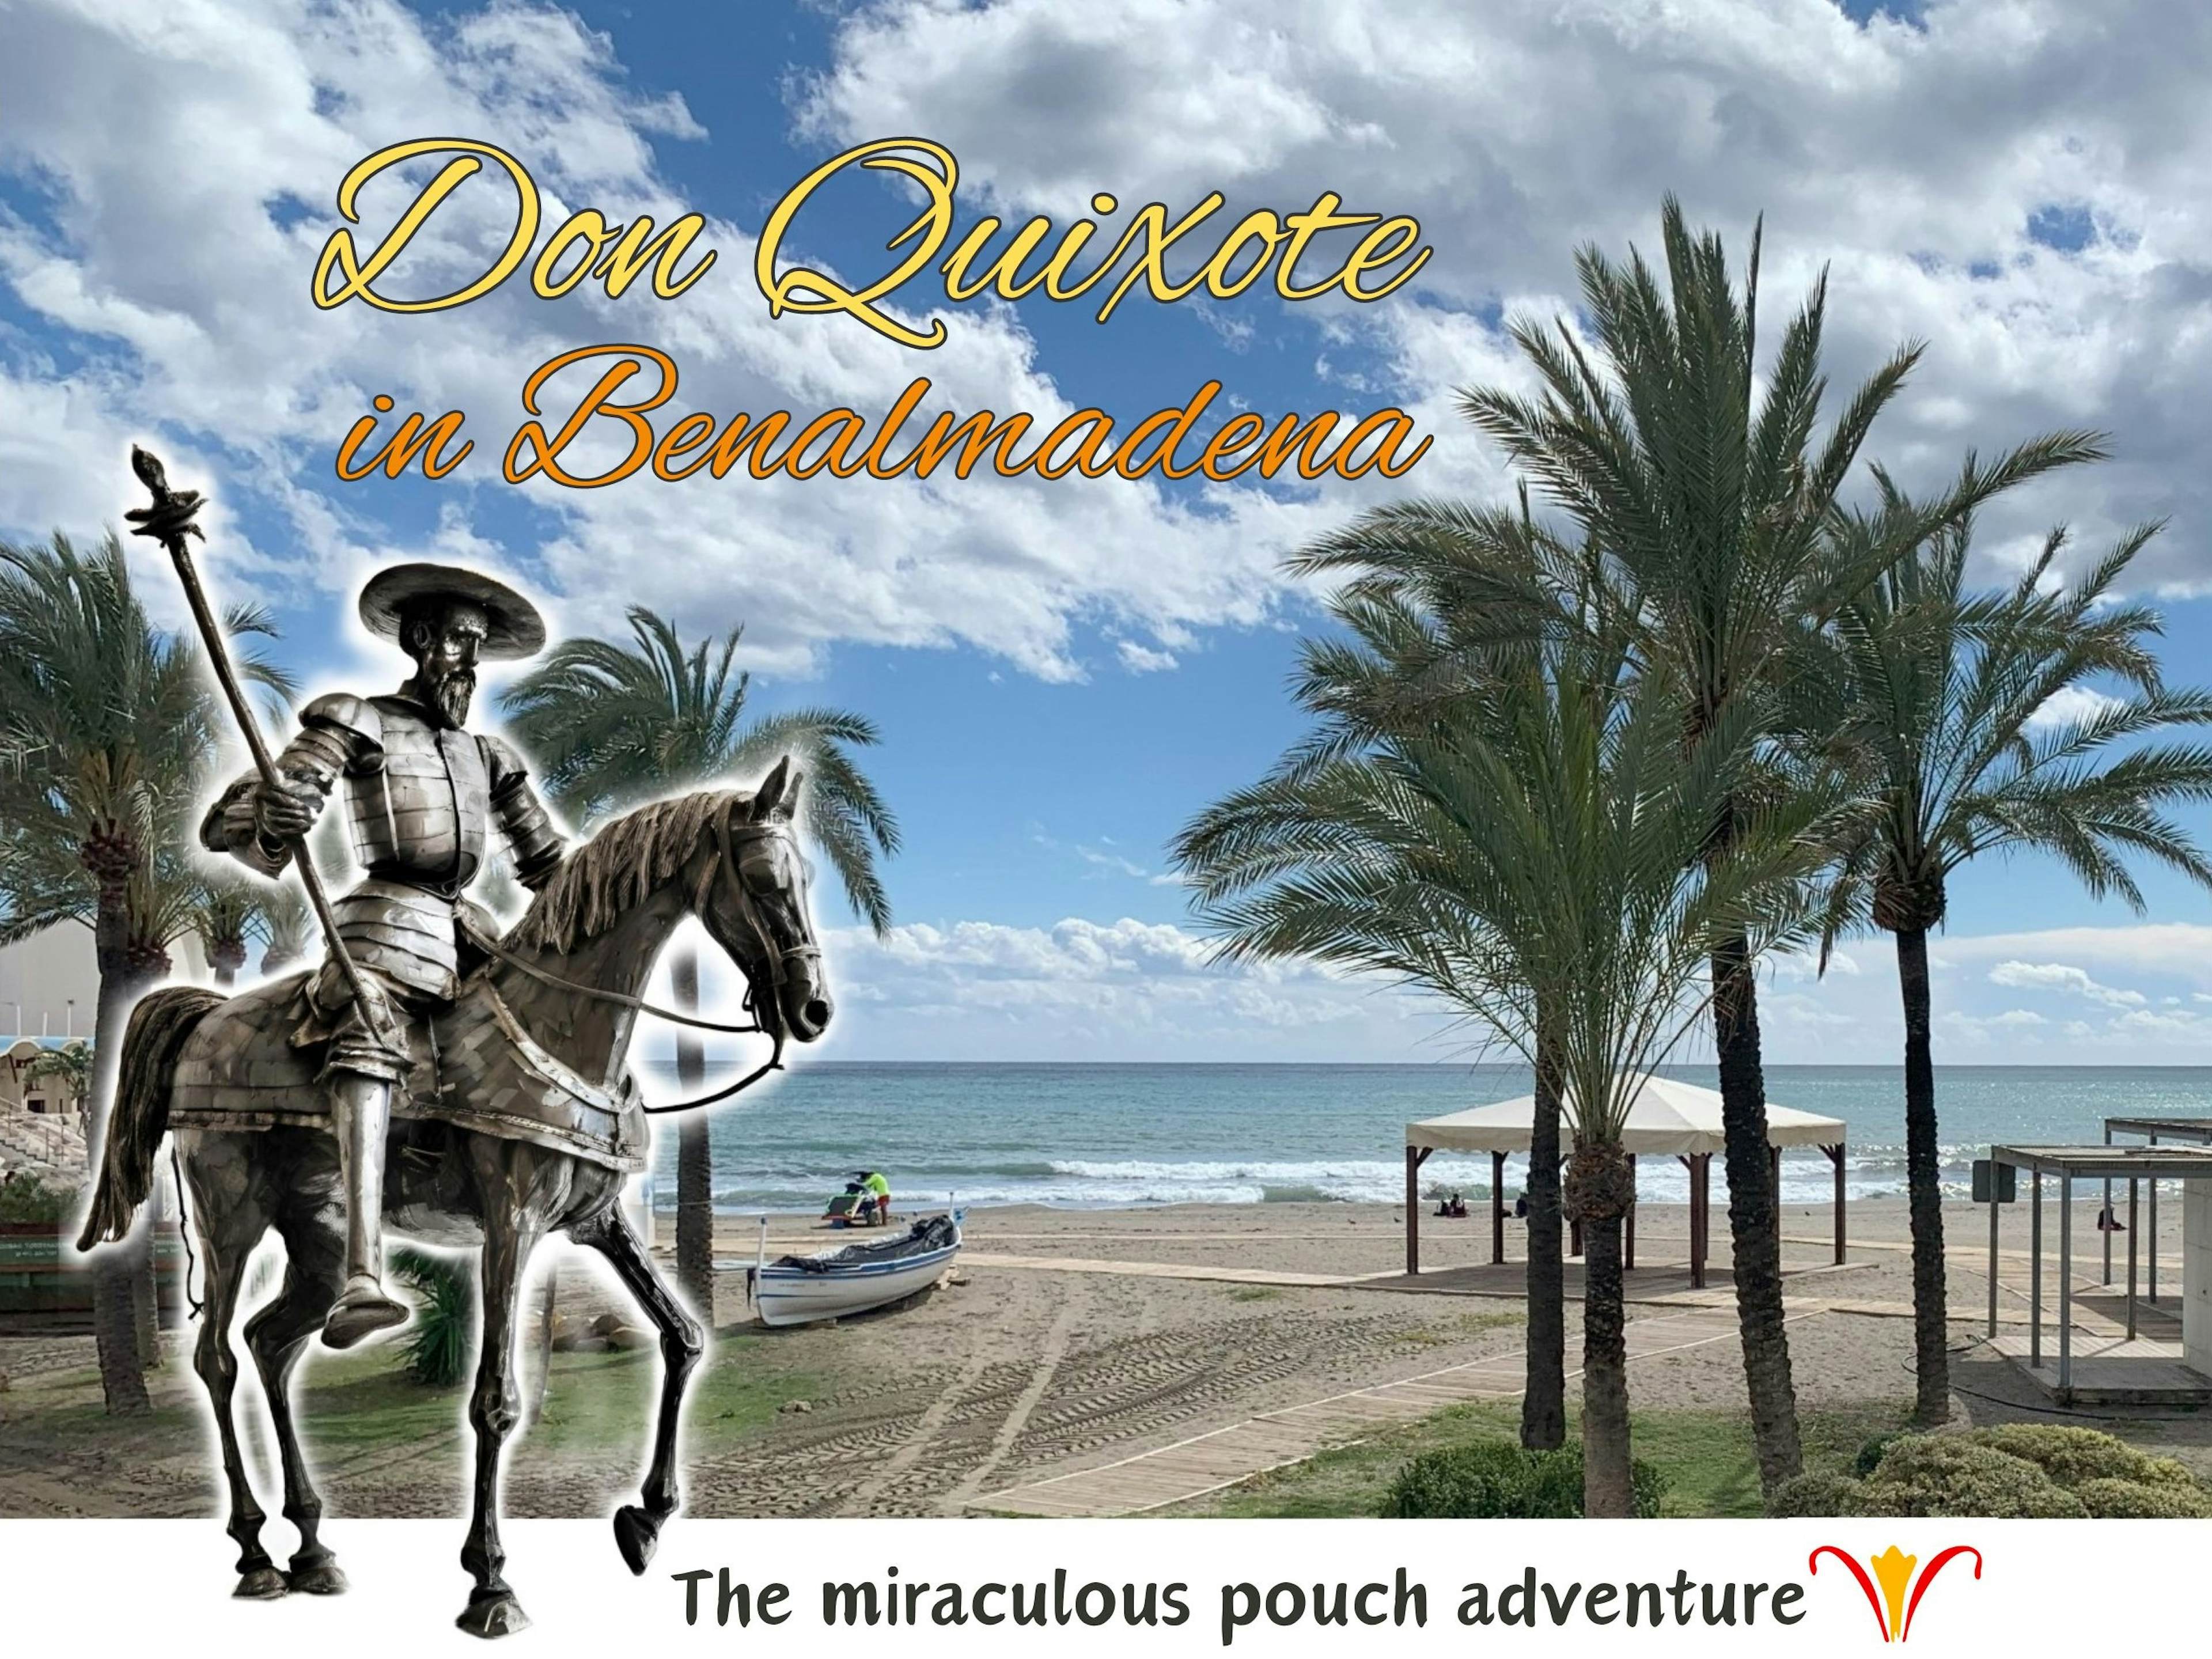 Don Quixote in Benalmadena - The miraculous pouch image